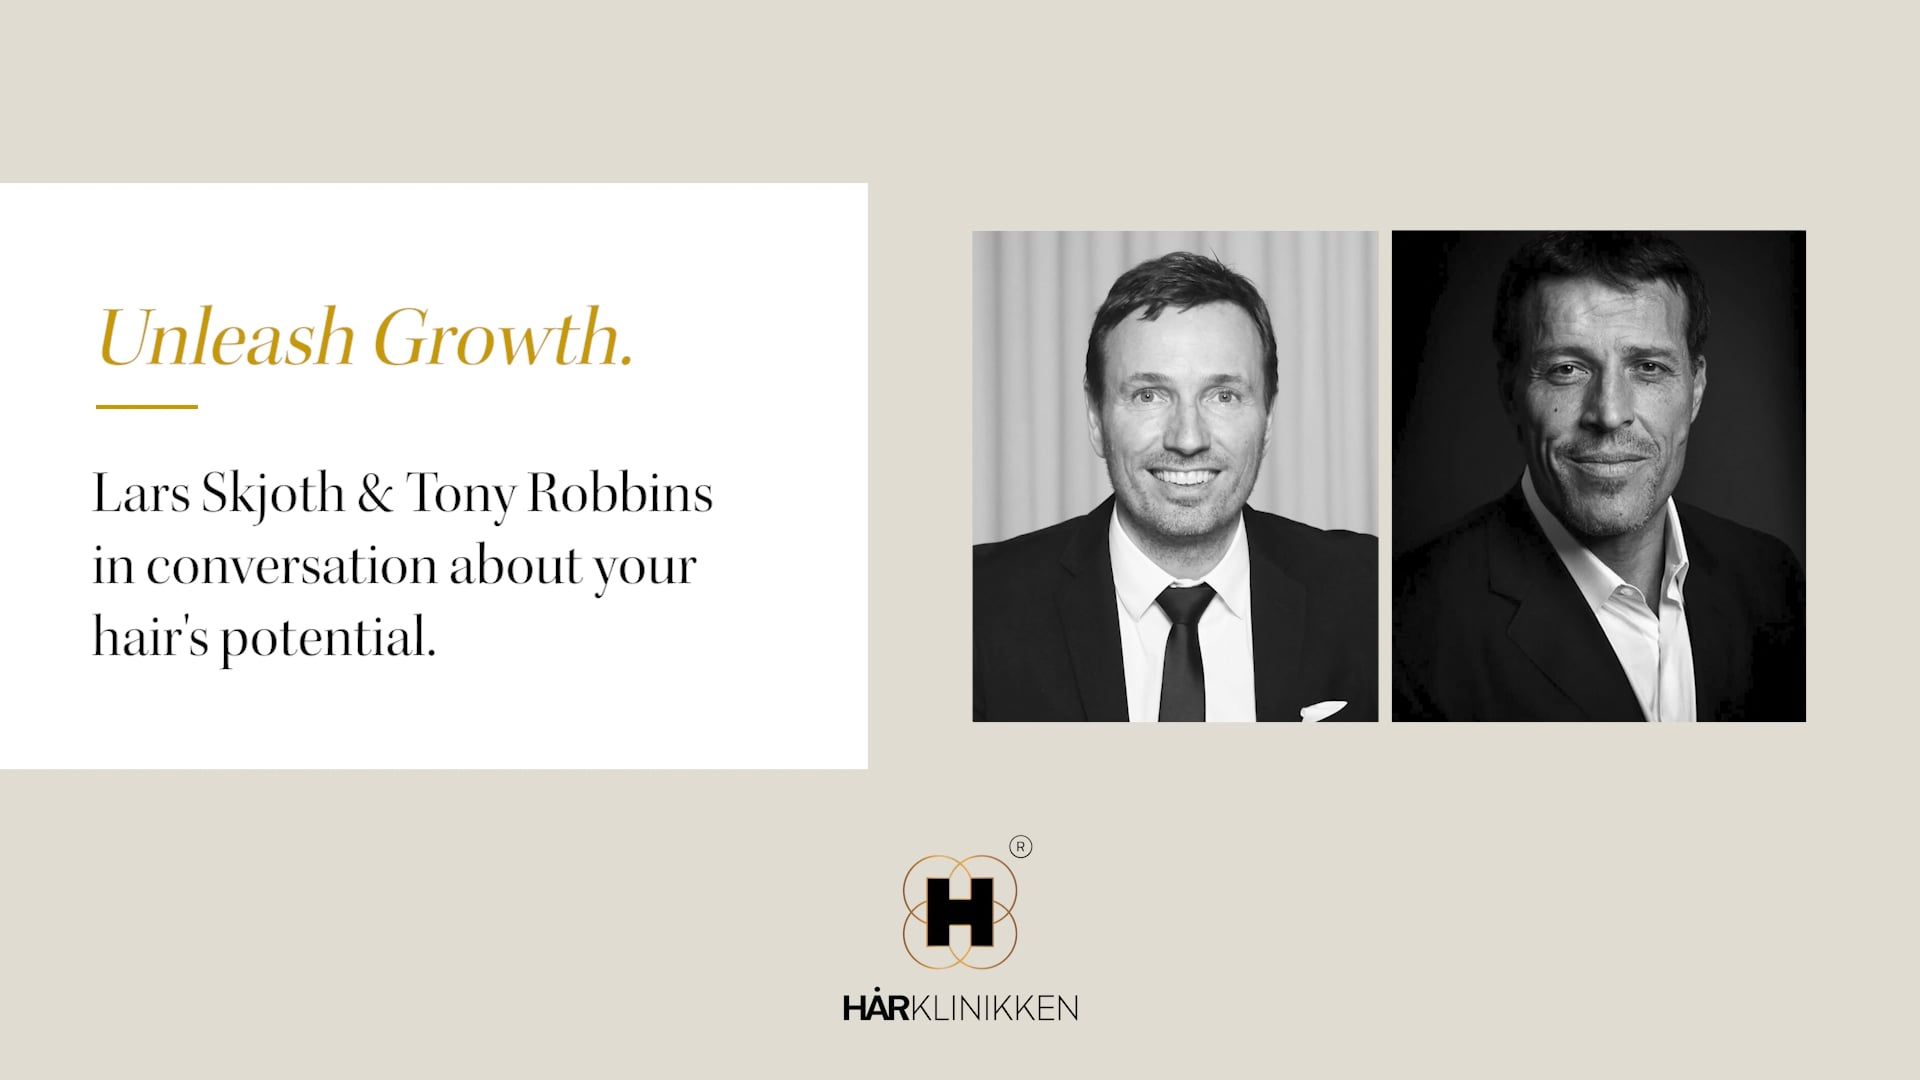 Tony-Robbins and Lars Skjoth in Conversation Poster